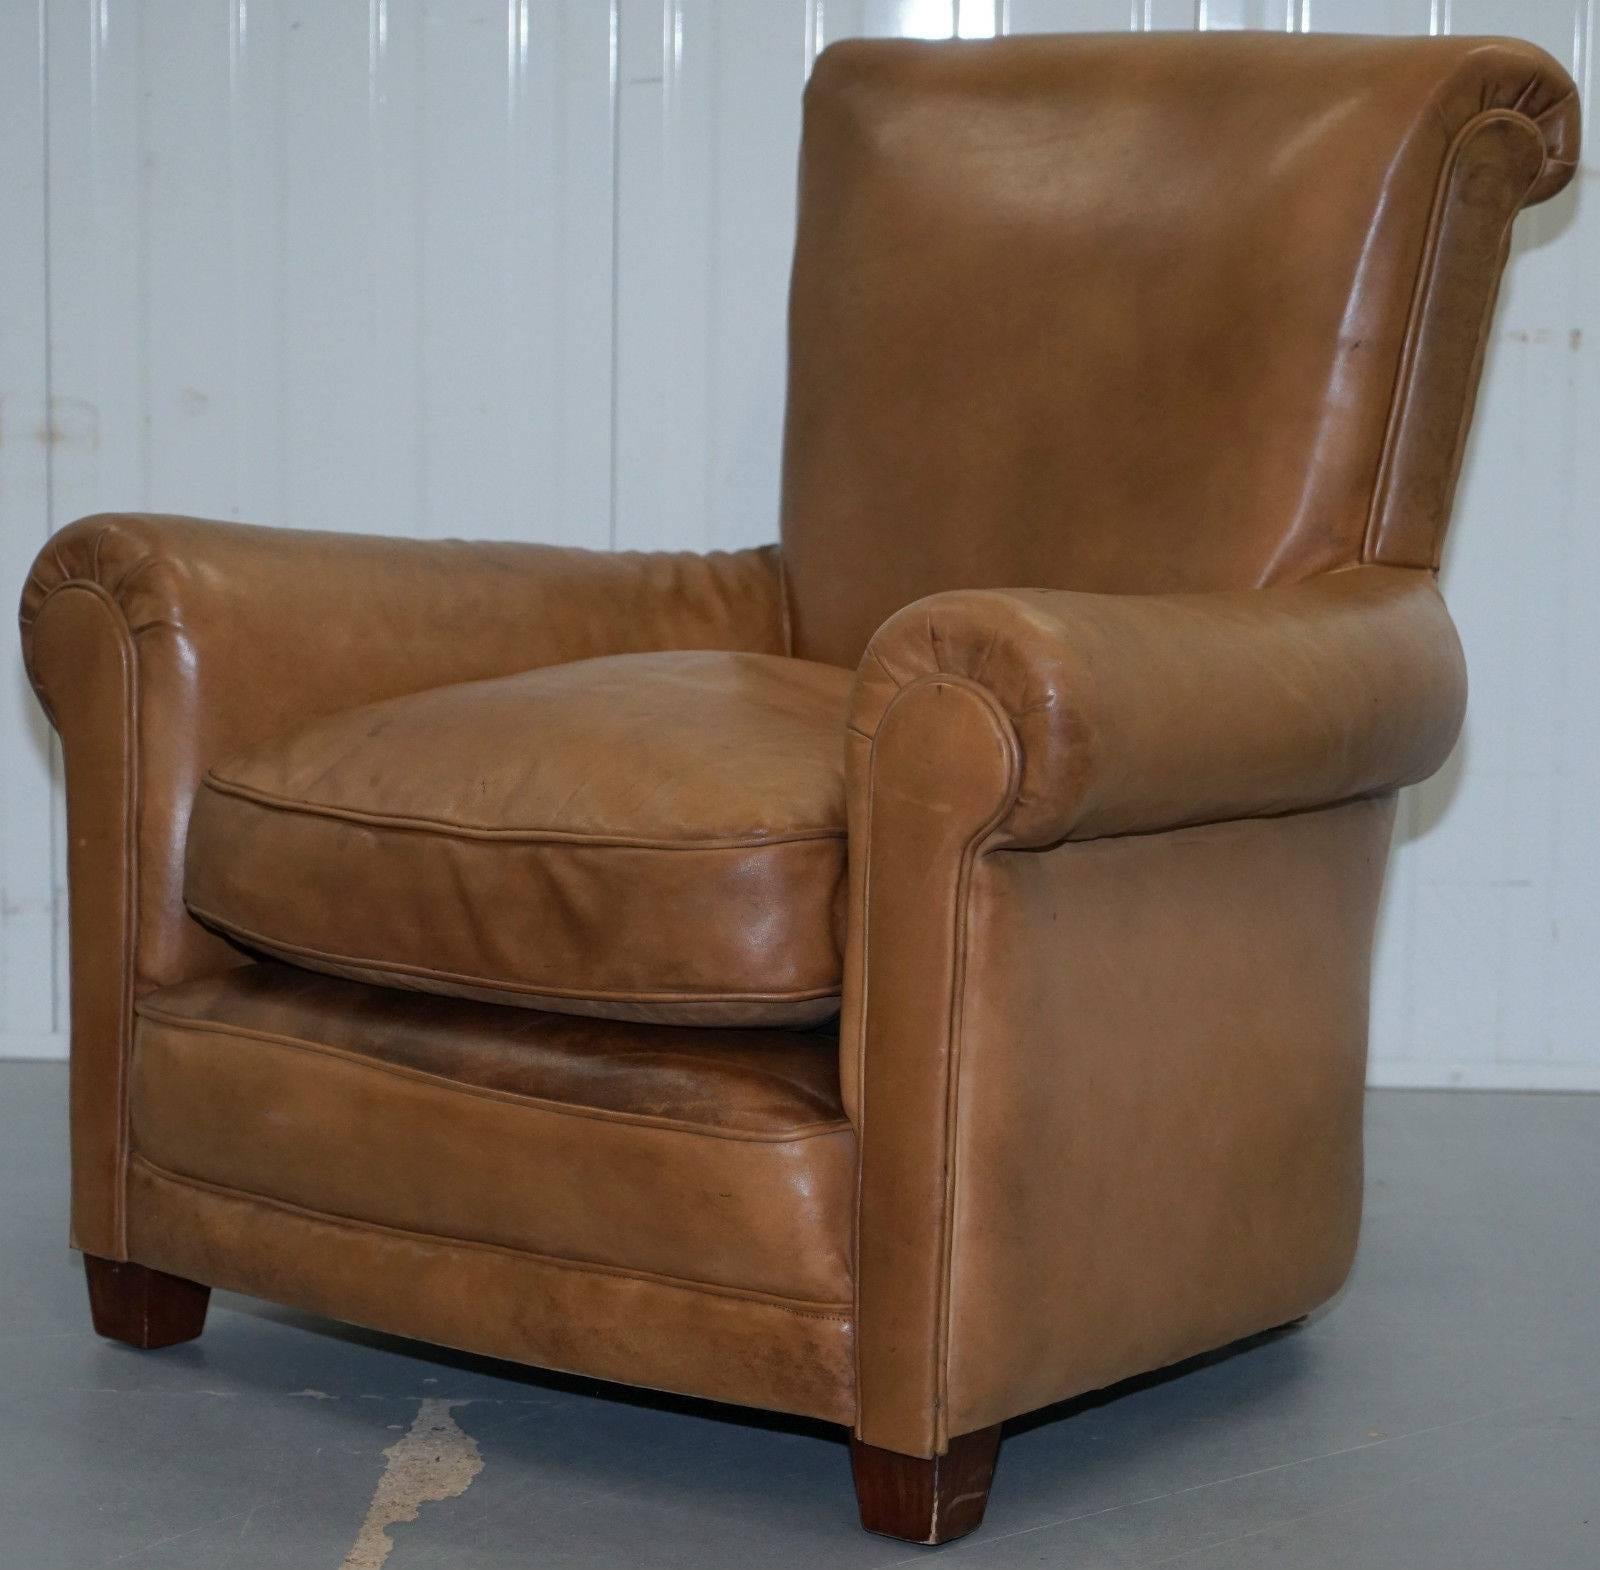 Victorian Antique Aged Tan Brown Leather Full Aniline English Gentlens Club Armchair